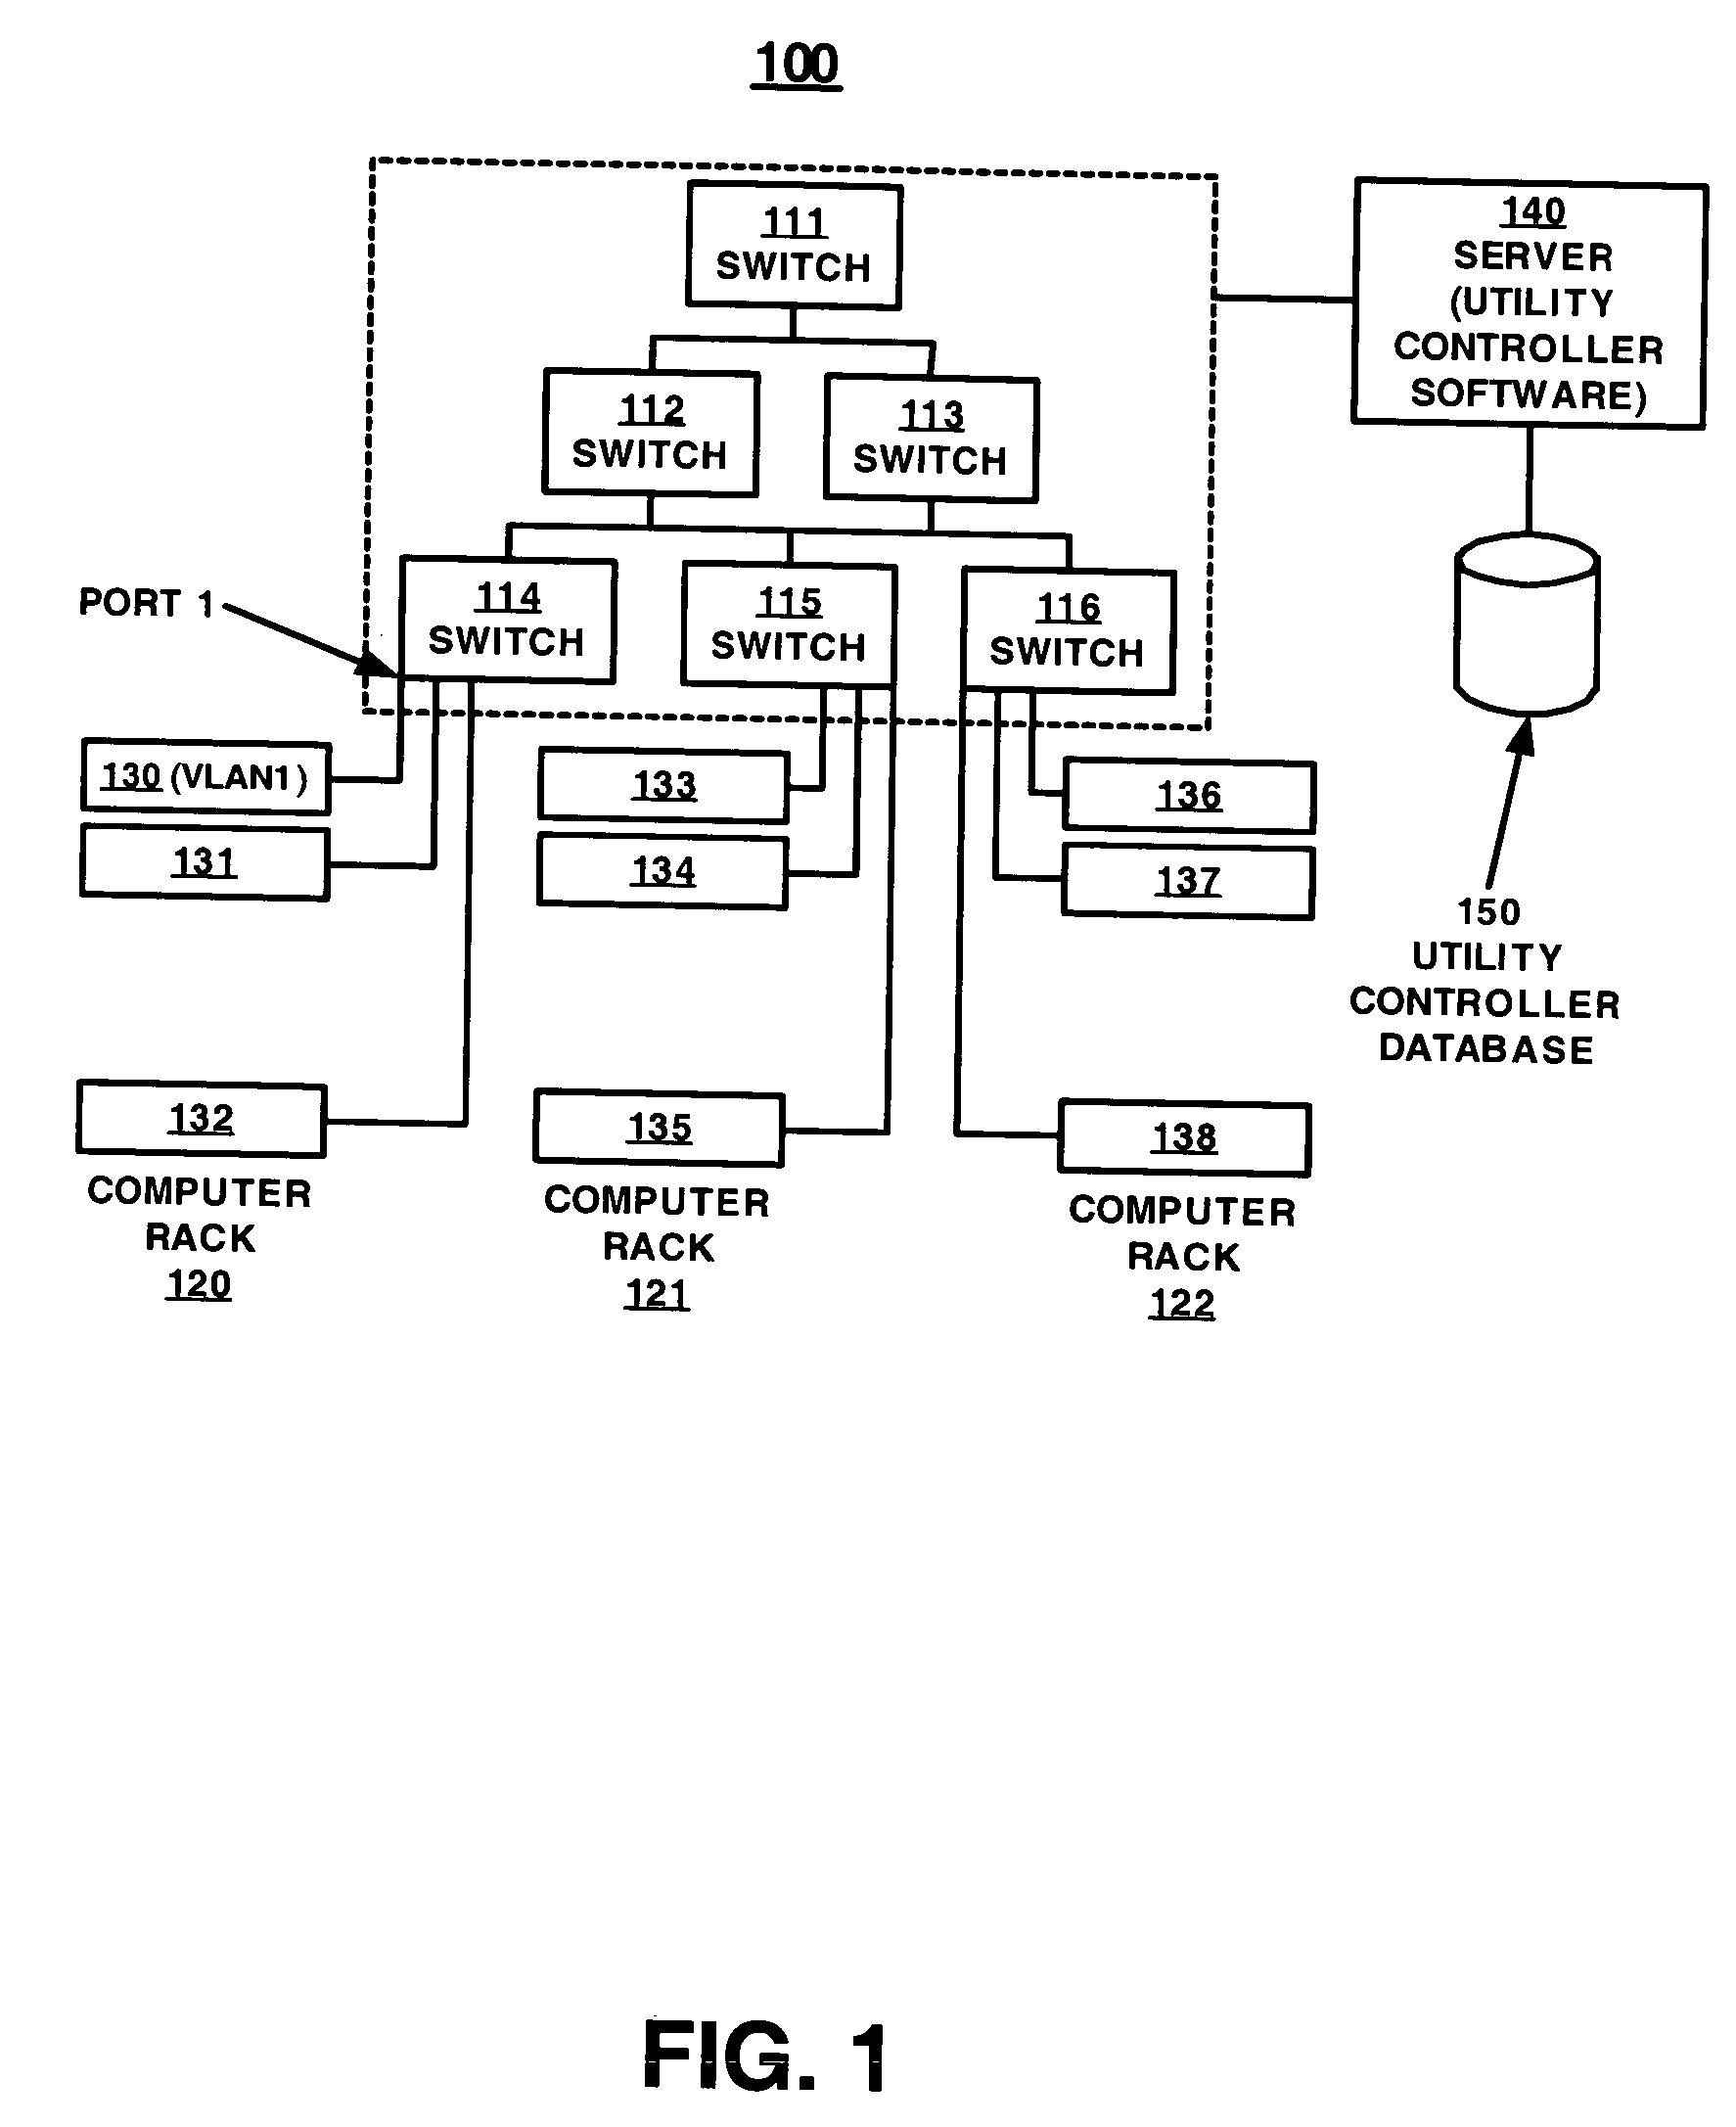 Method and apparatus for automatic and secure distribution of a symmetric key security credential in a utility computing environment